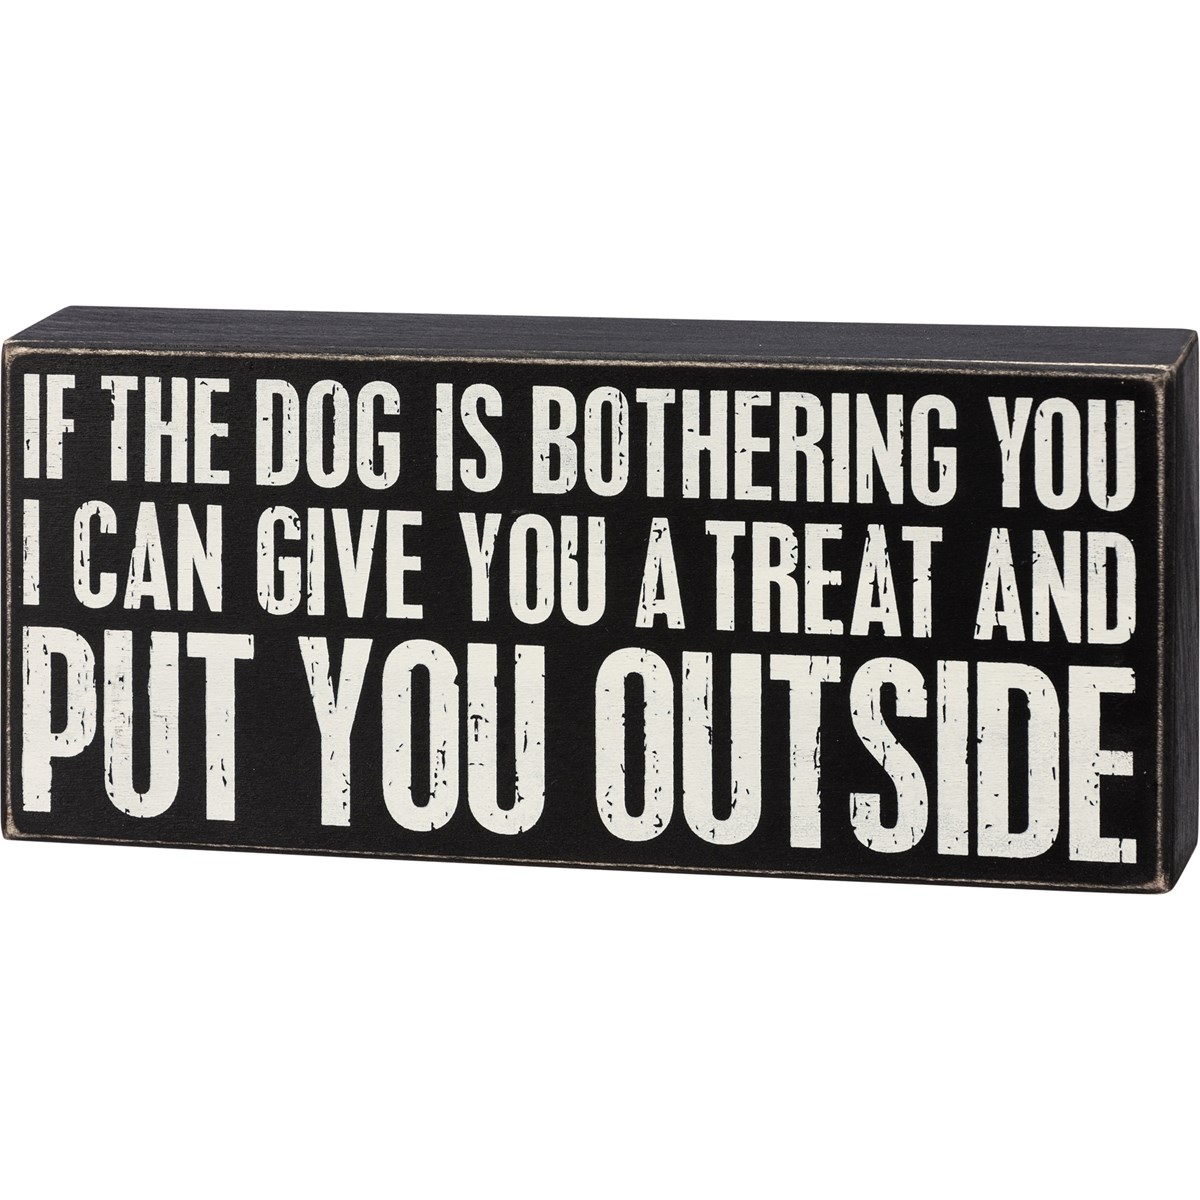 If The Dog Is Bothering You Box Sign - Wood